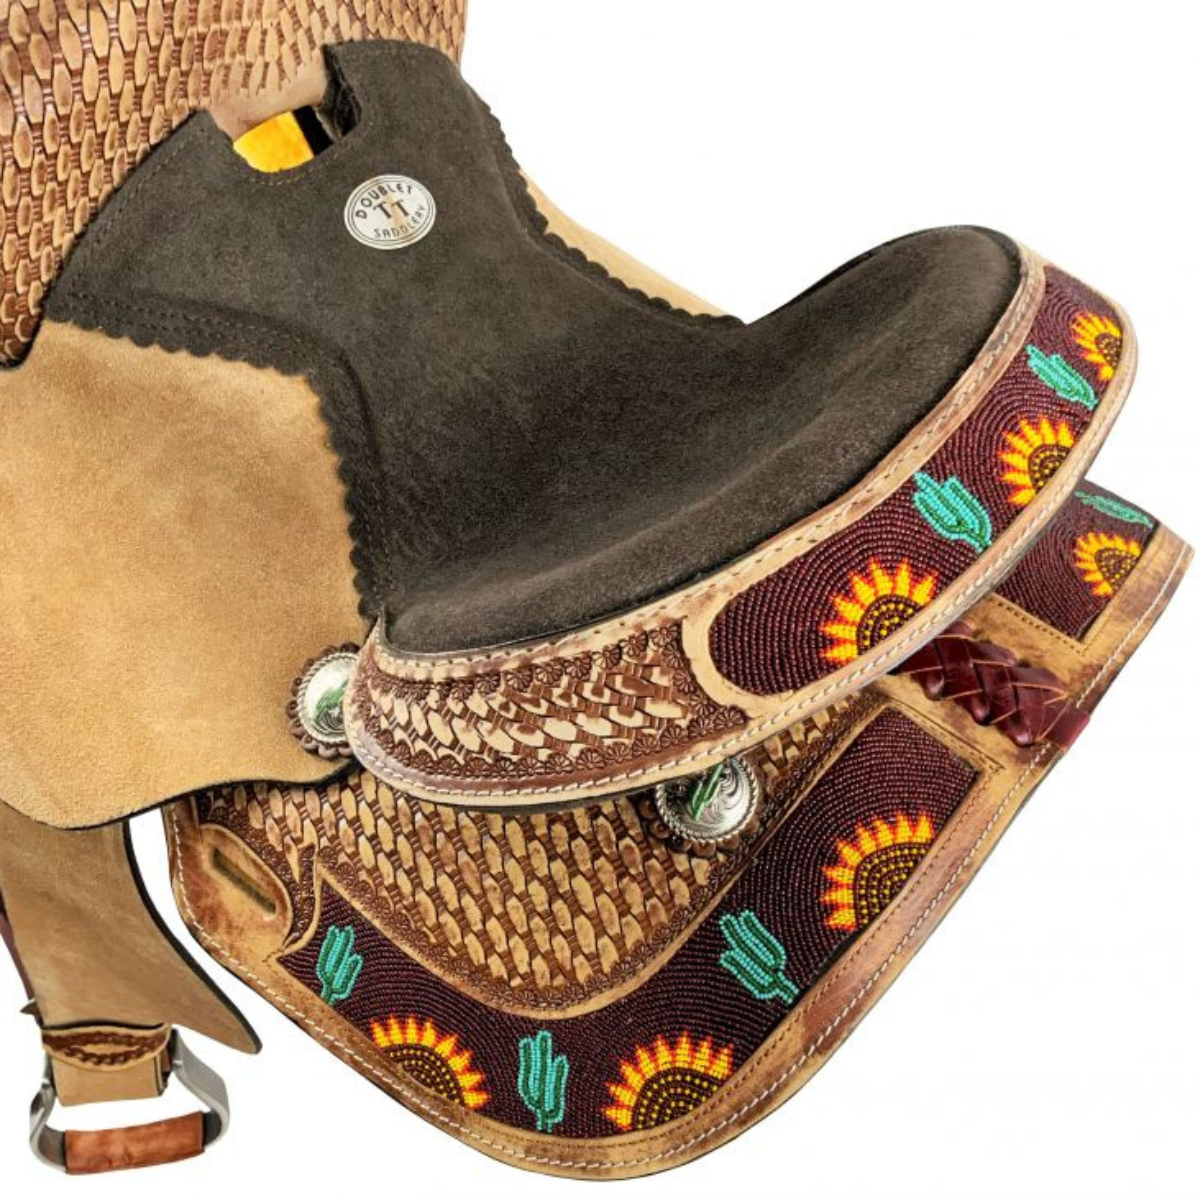 10" Double T  Youth Hard Seat Barrel style saddle with cactus and sunflower beaded accents. - Double T Saddles